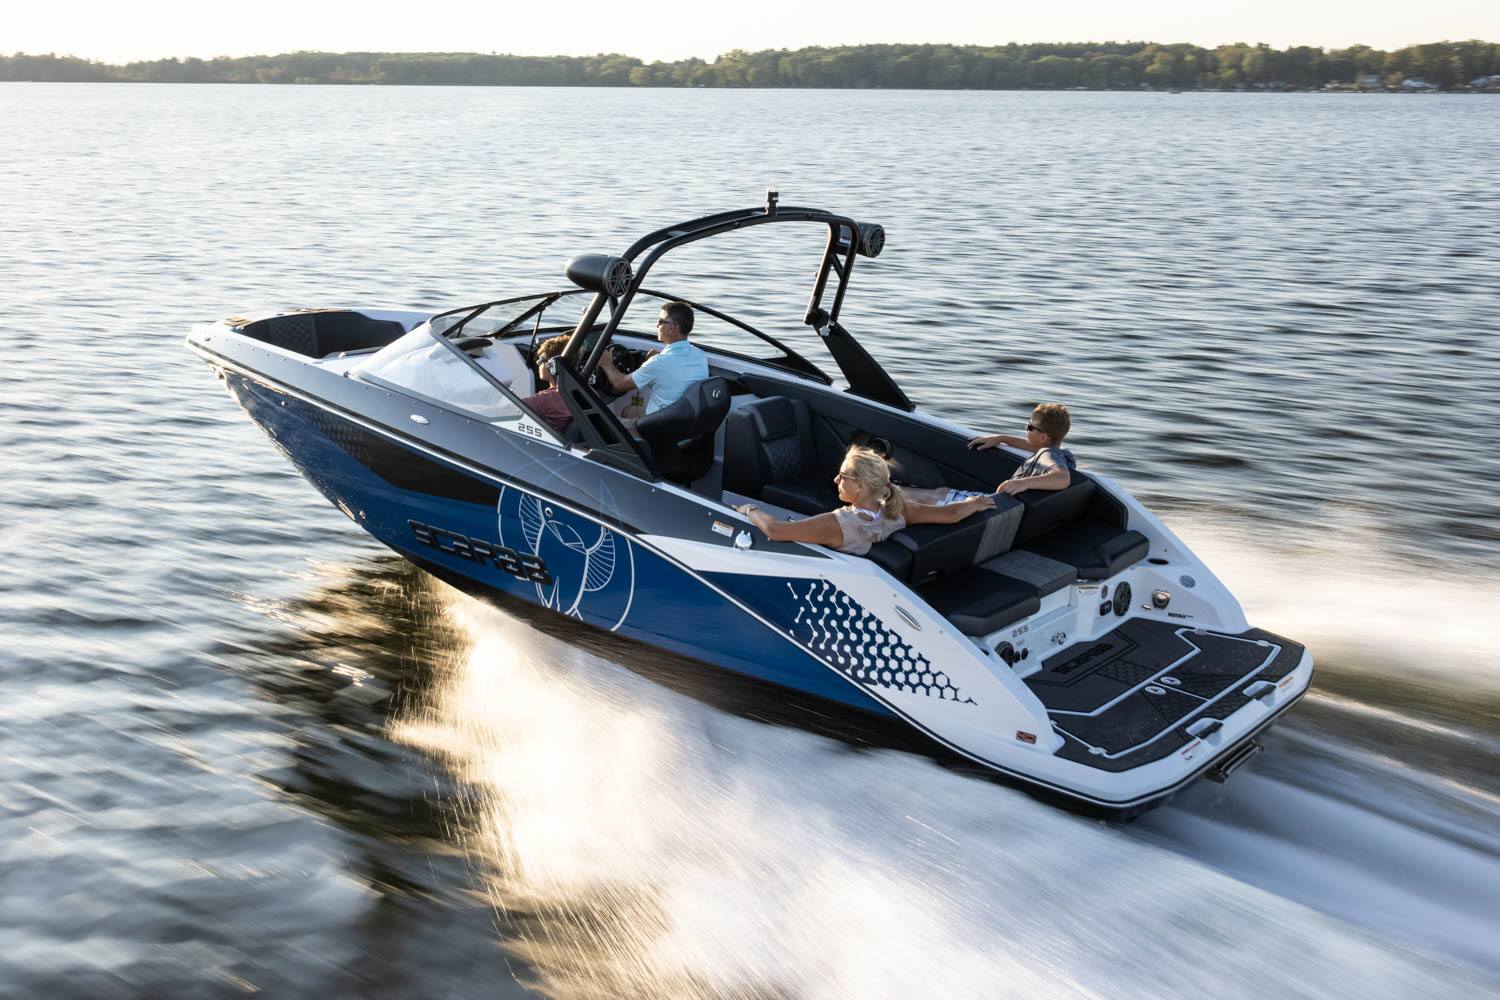 2022 Scarab 255 ID in Clearwater, Florida - Photo 4